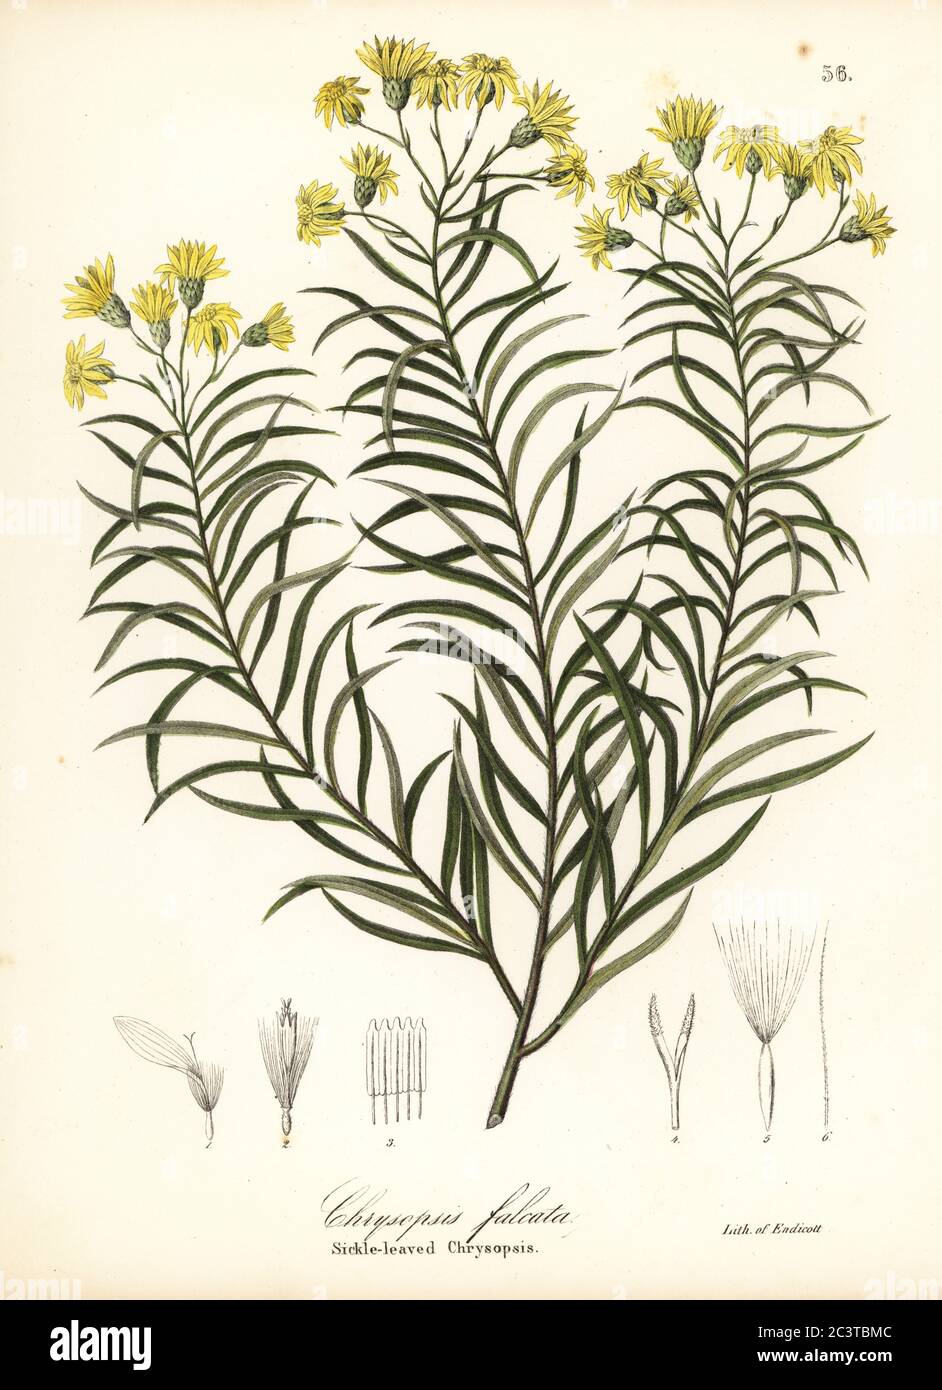 Sickleleaf silkgrass or sickle-leaved golden aster, Pityopsis falcata (Sickle-leaved chrysopsis, Chrysopsis falcata). Handcoloured lithograph by Endicott after a botanical illustration from John Torrey’s A Flora of the State of New York, Carroll and Cook, Albany, 1843. The plates drawn by John Torrey, Agnes Mitchell, Elizabeth Paoley and Swinton. John Torrey was an American botanist, chemist and physician 1796-1873. Stock Photo